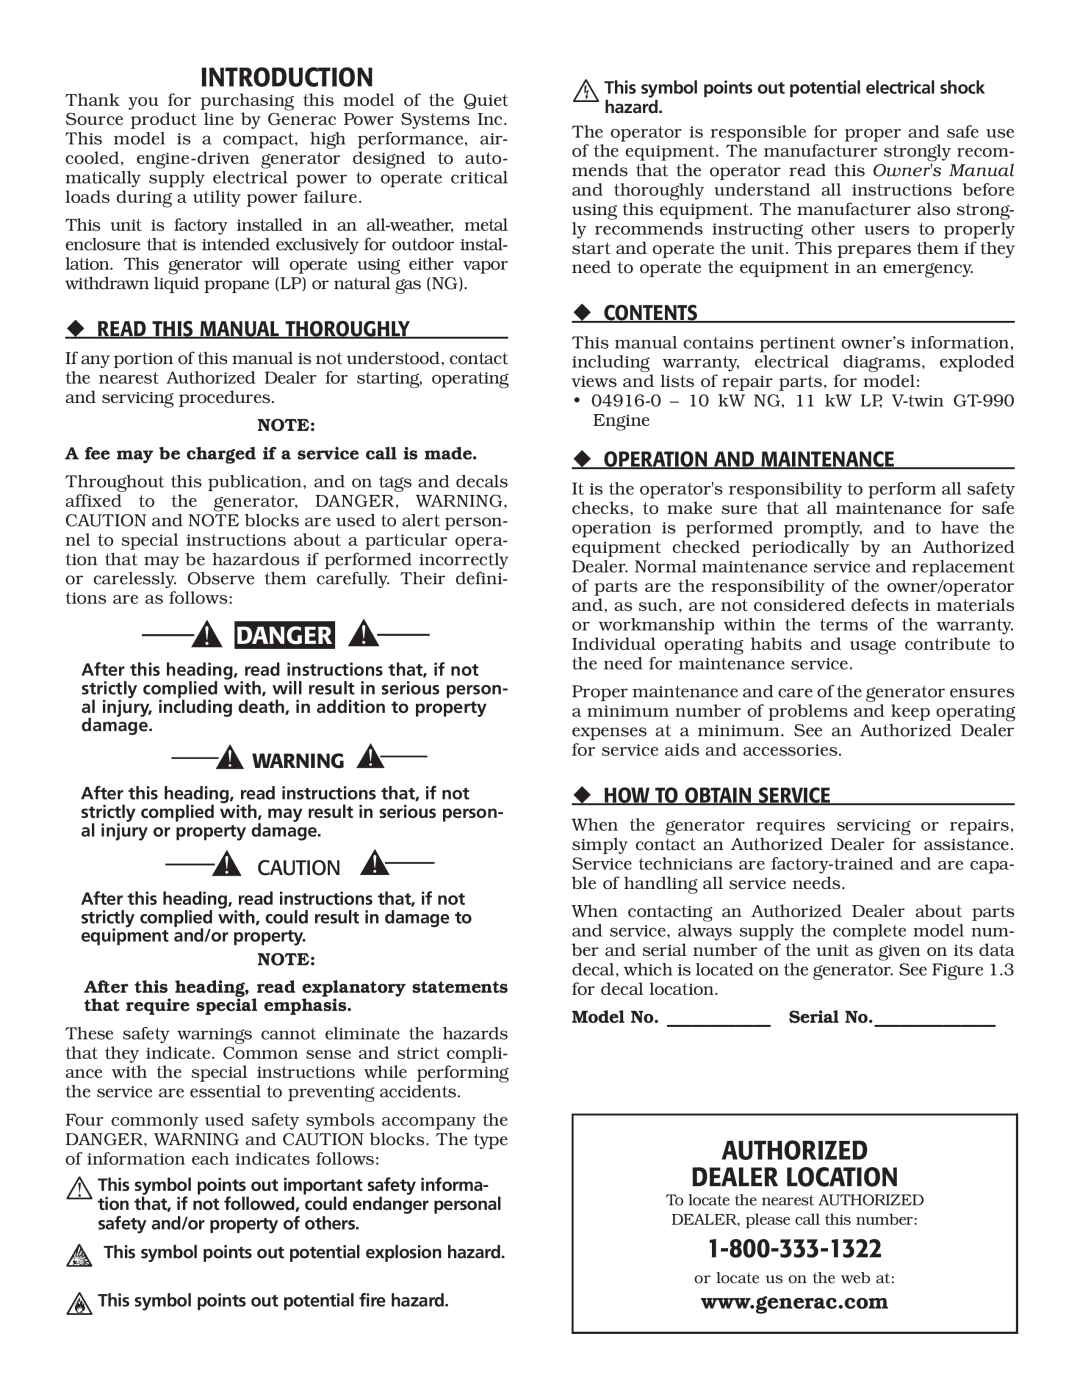 Generac Power Systems 004916-0 Introduction, Authorized Dealer Location, Danger, ‹ Read This Manual Thoroughly, ‹ Contents 